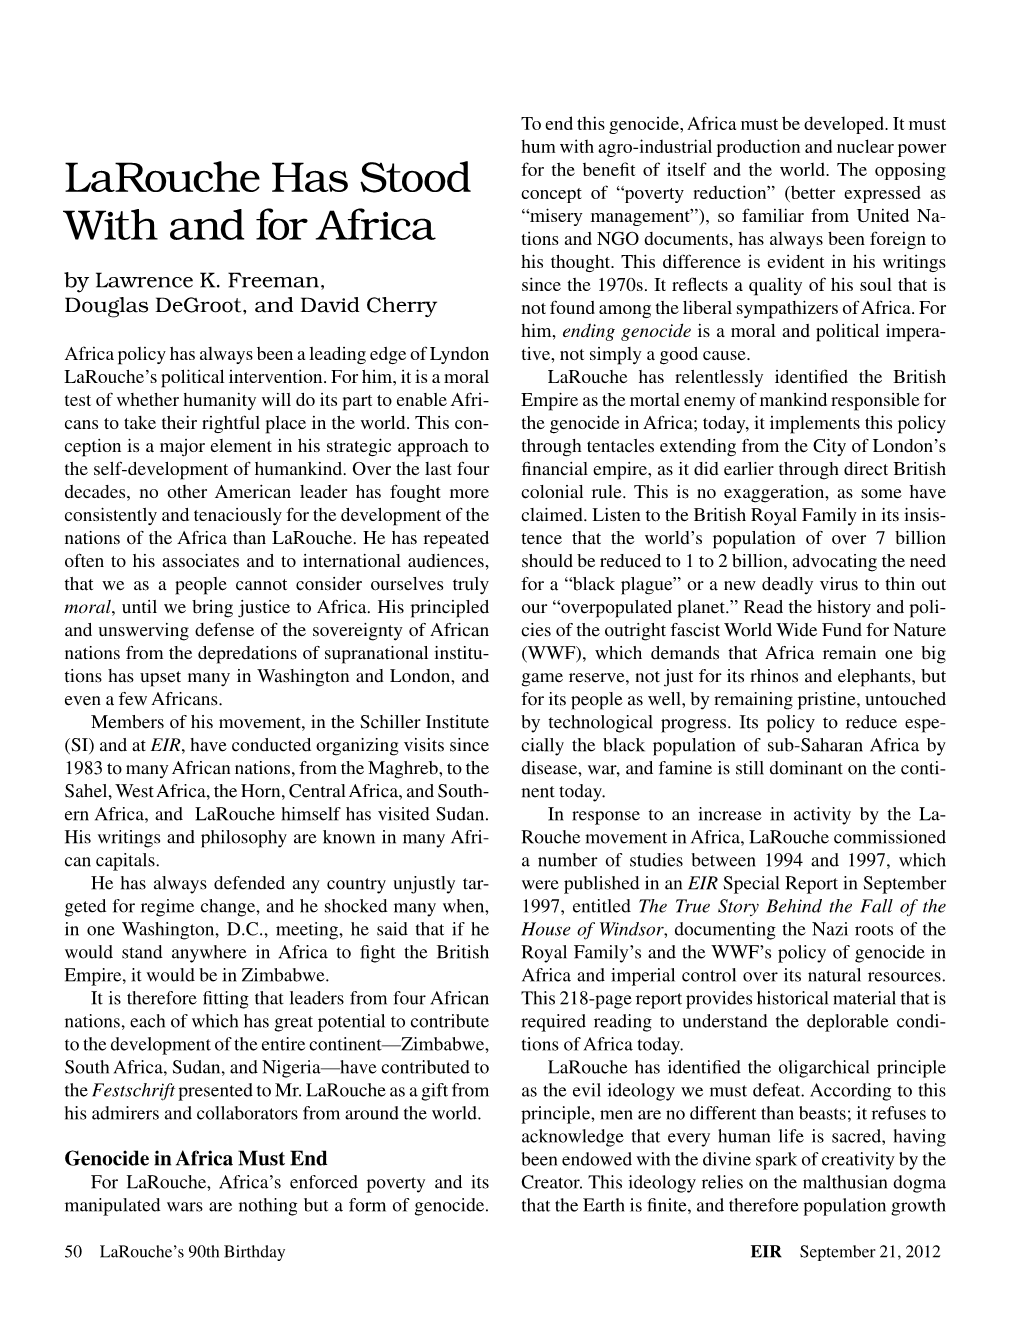 Larouche Has Stood with and for Africa